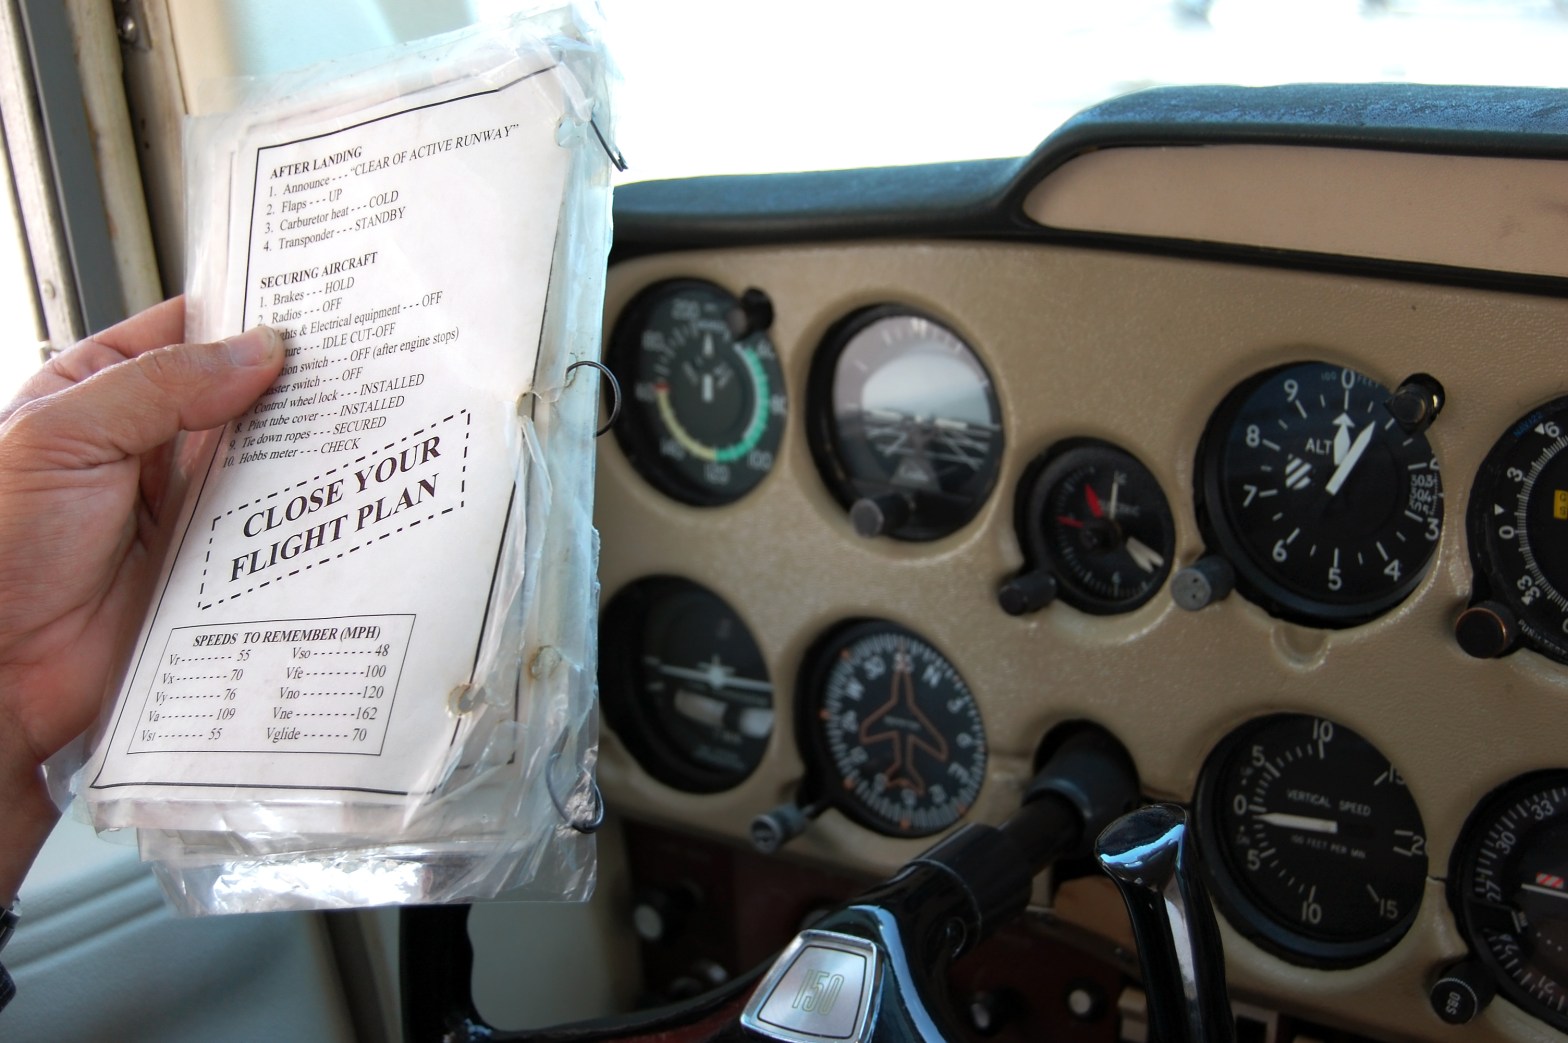 Photo of "Close Your Flight Plan" checklist being followed from inside the cockpit of an airplane.